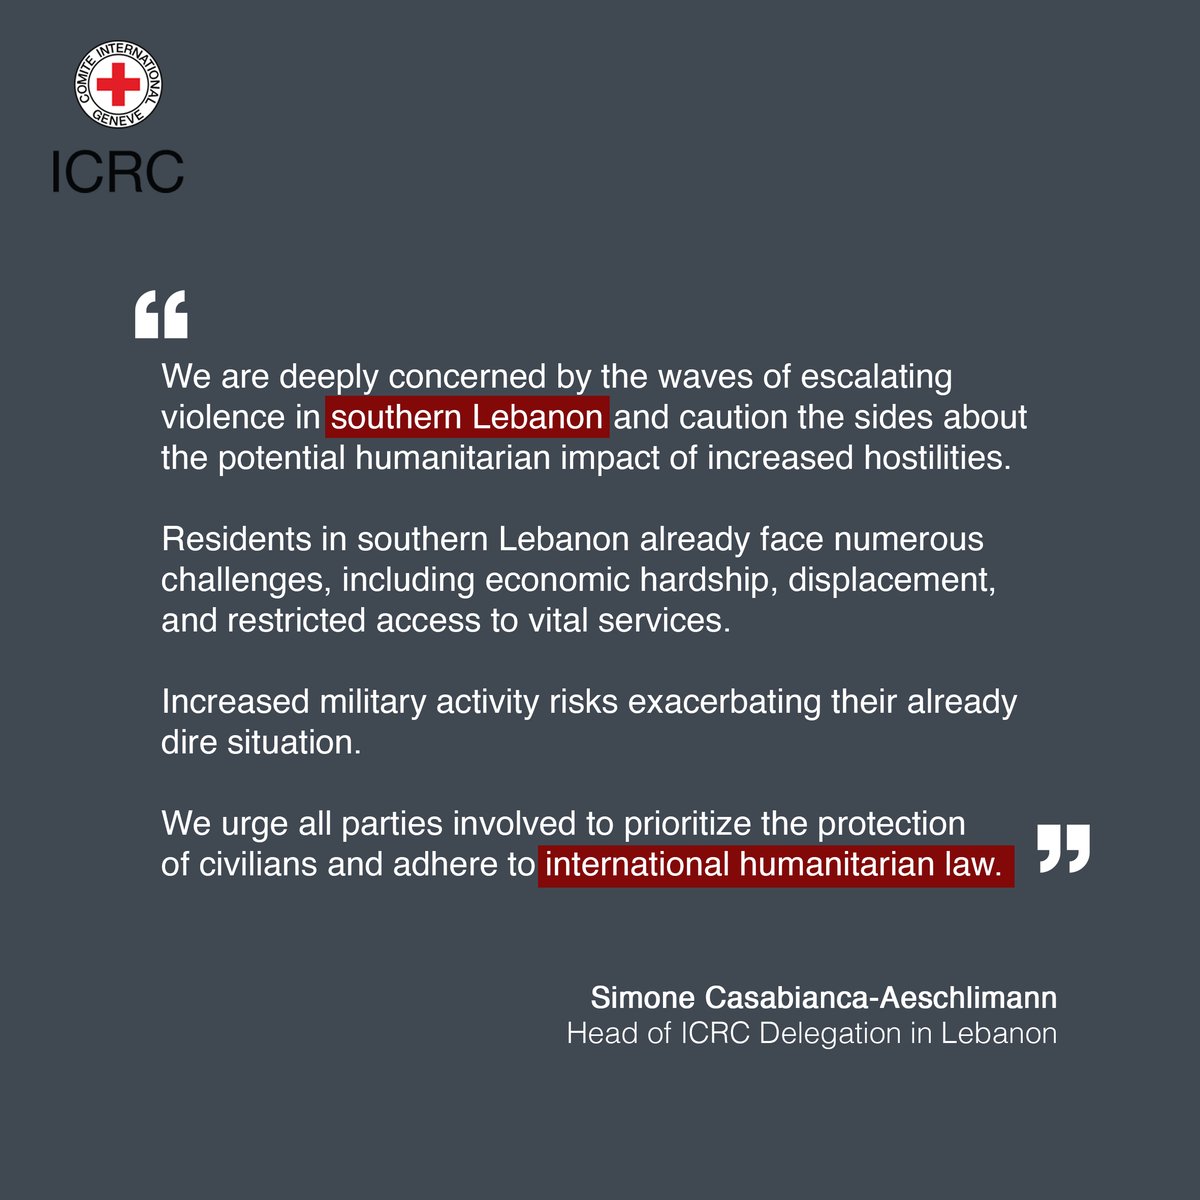 Amid the escalating events in southern #Lebanon, we call on all concerned parties to preserve the lives of #civilians and adhere to the principles of #internationalhumanitarianlaw.